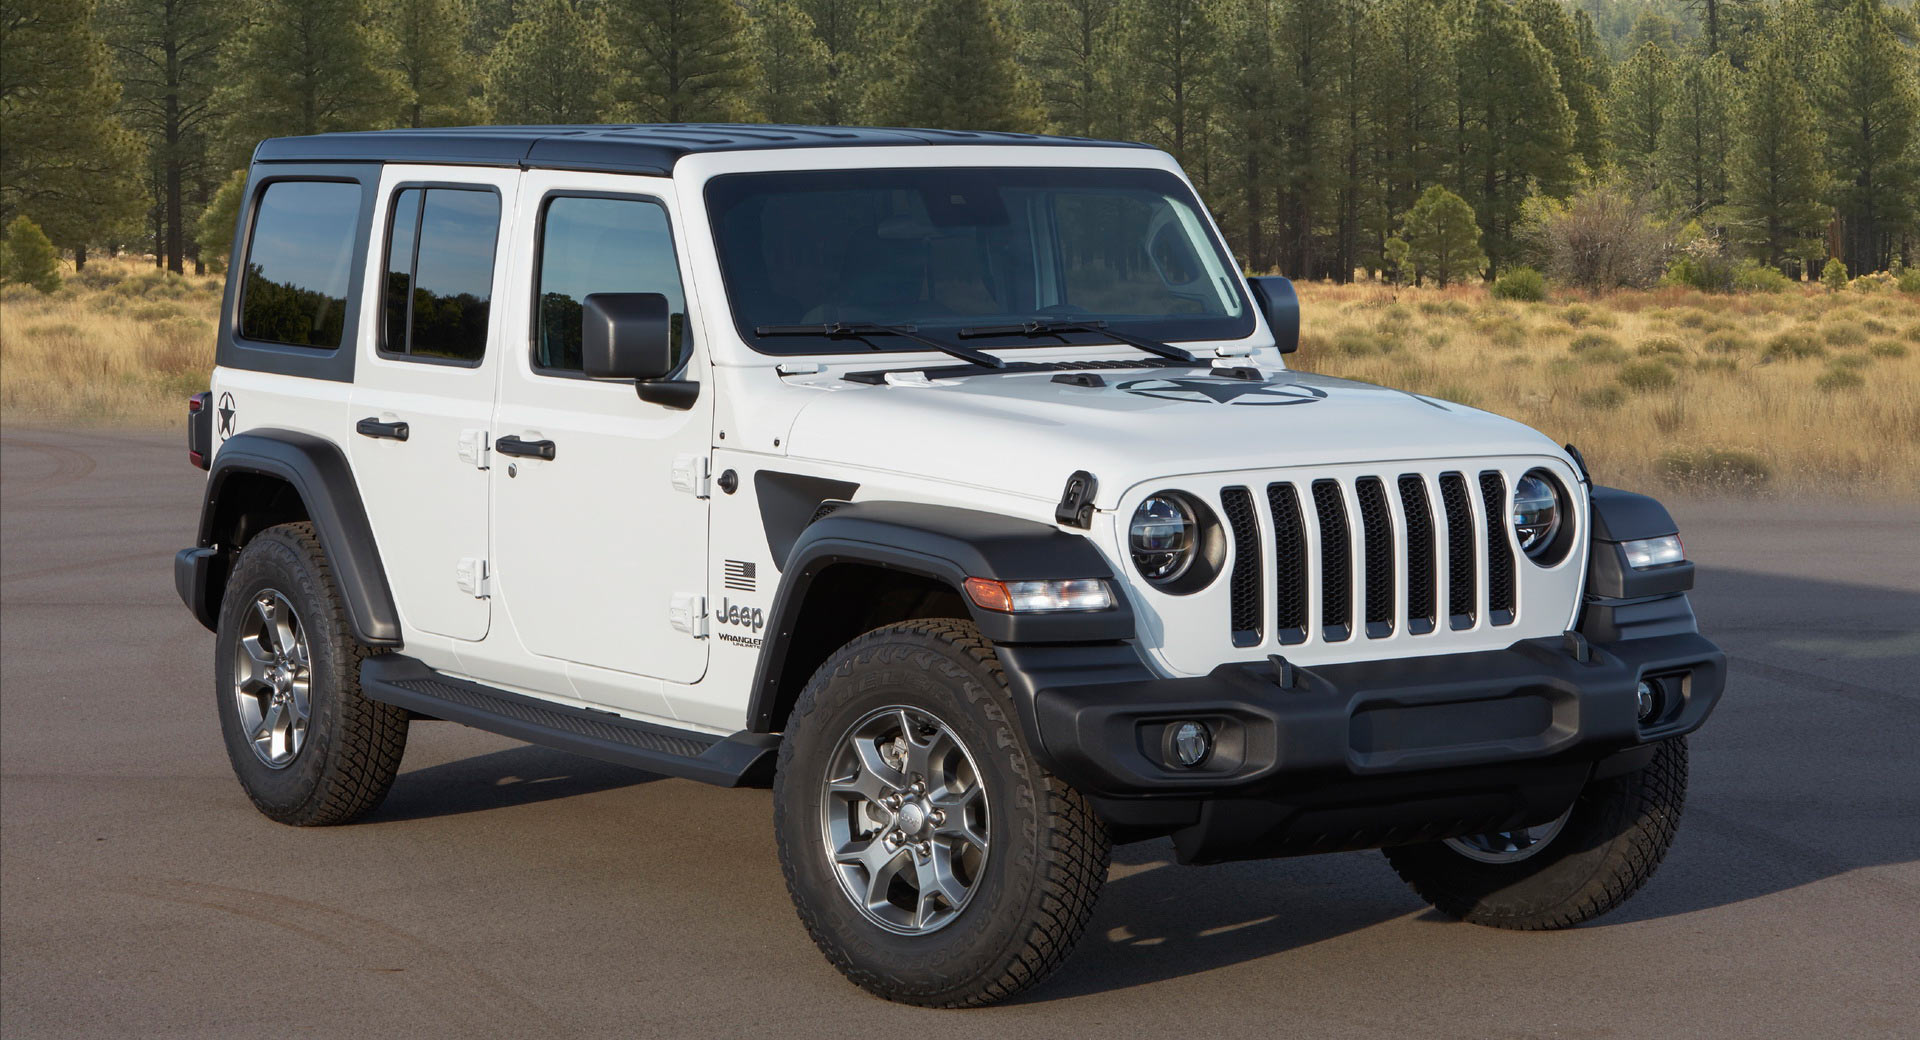 FCA Says New Jeep Wrangler’s Global Warming Potential Is 15% Lower Than Predecessor’s - CarScoops